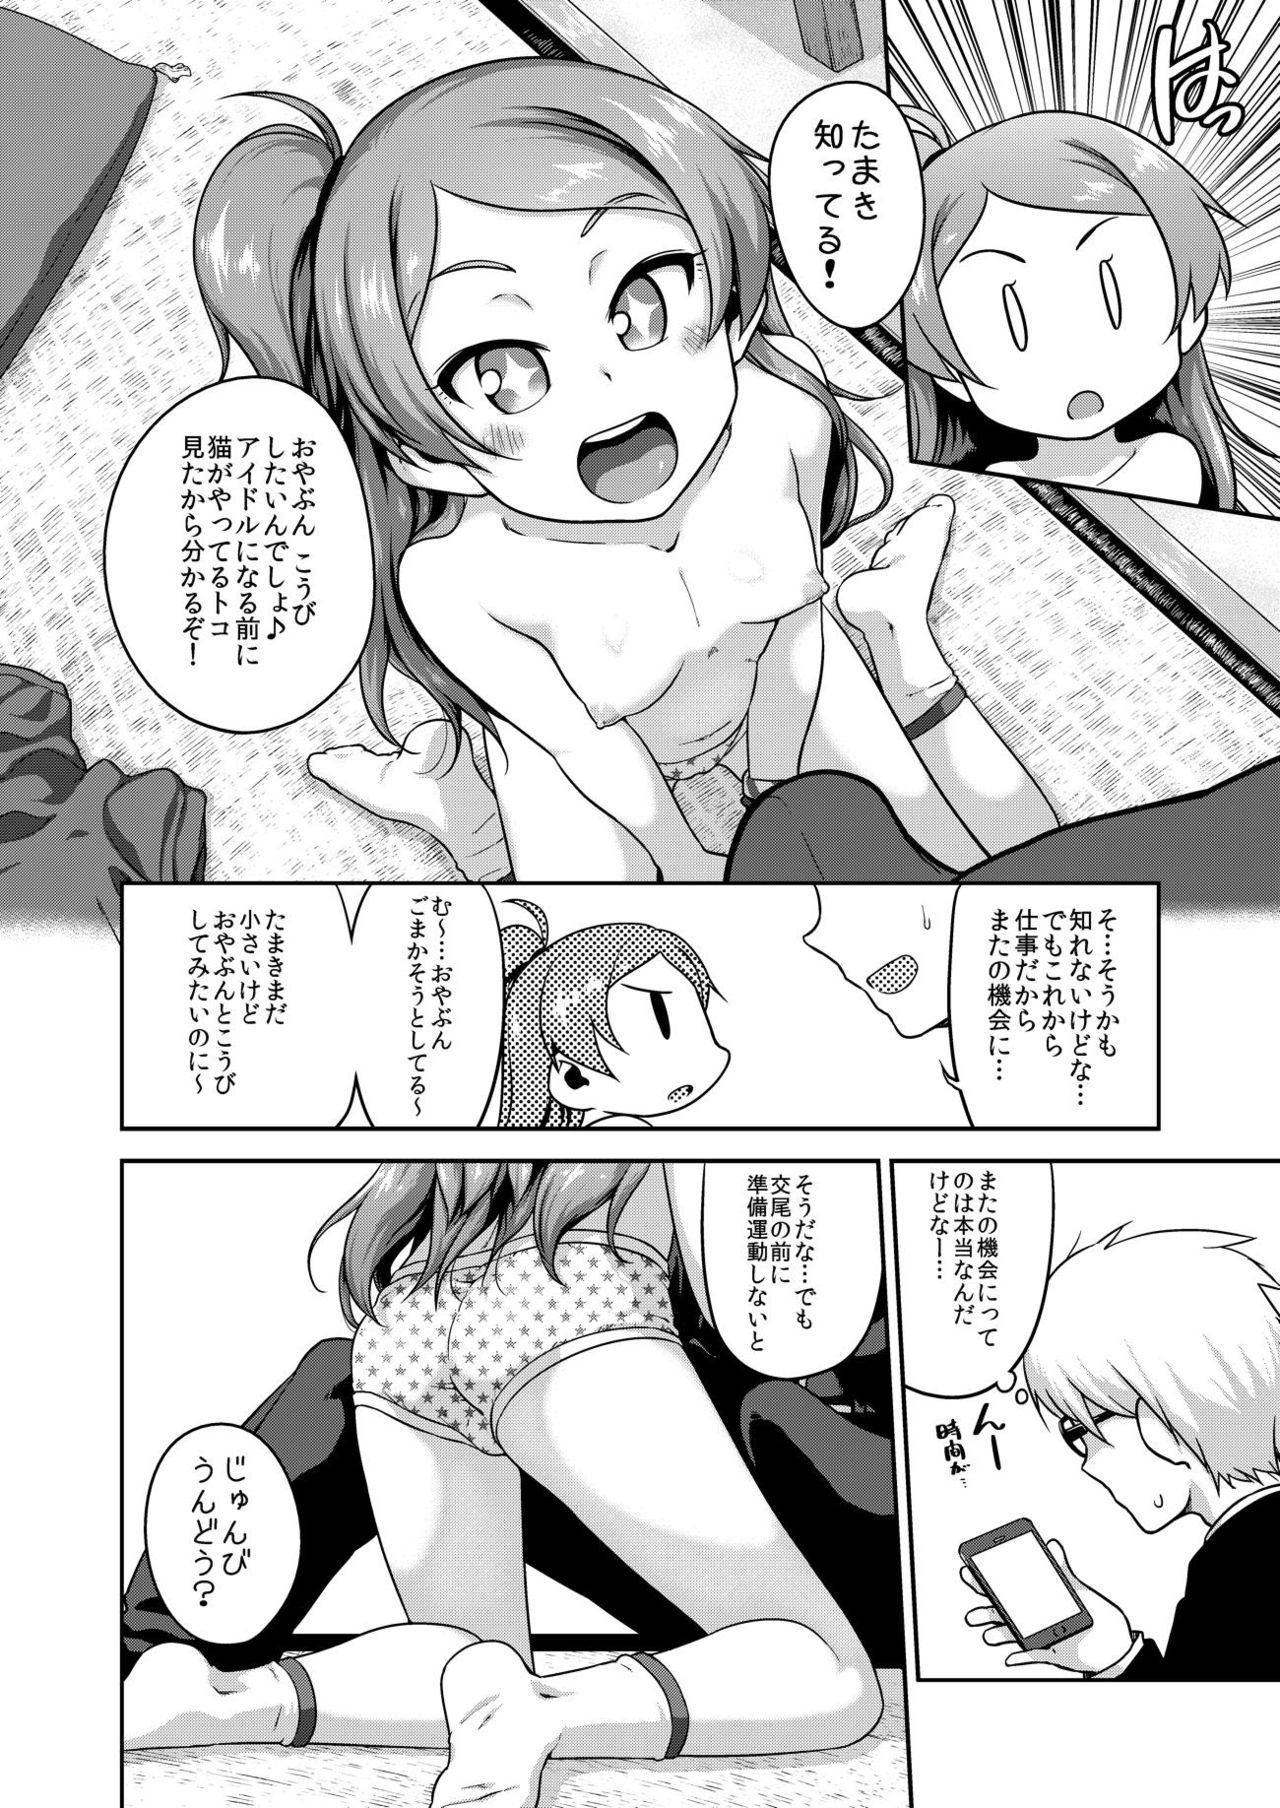 Soloboy Bouncing - The idolmaster Olderwoman - Page 3